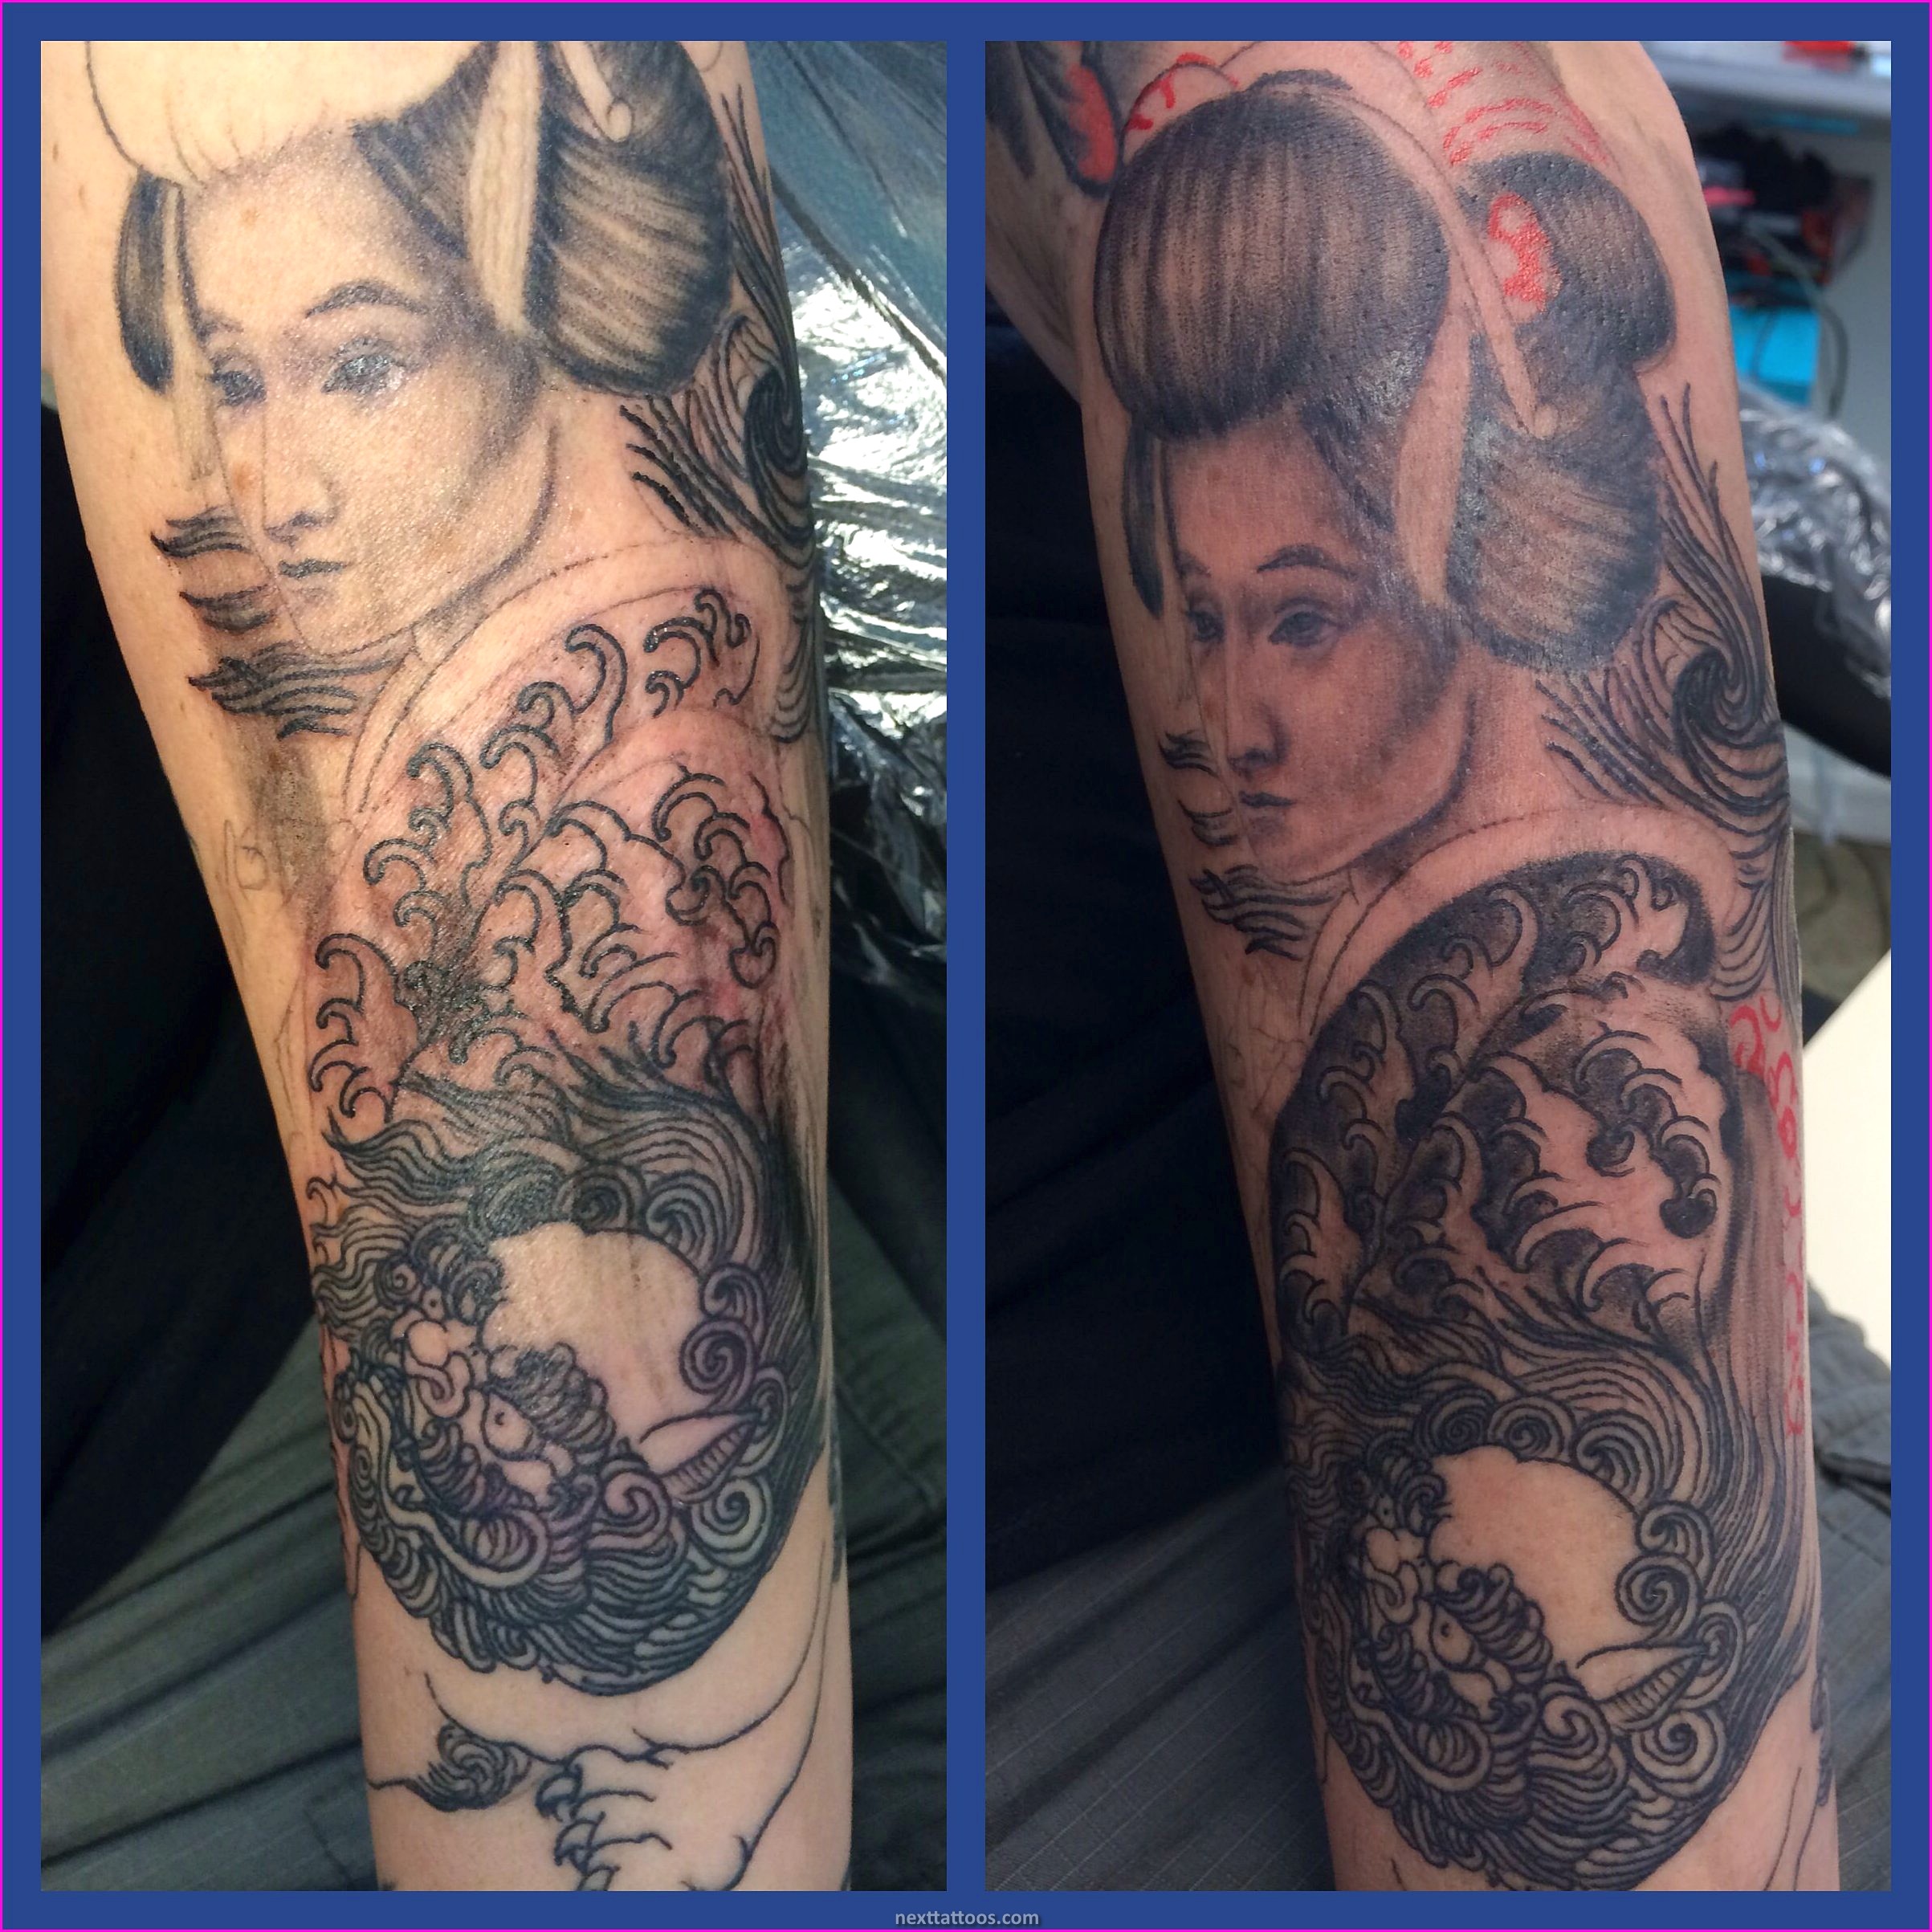 Left Arm Tattoos For Guys and Left Arm Tattoos For Females